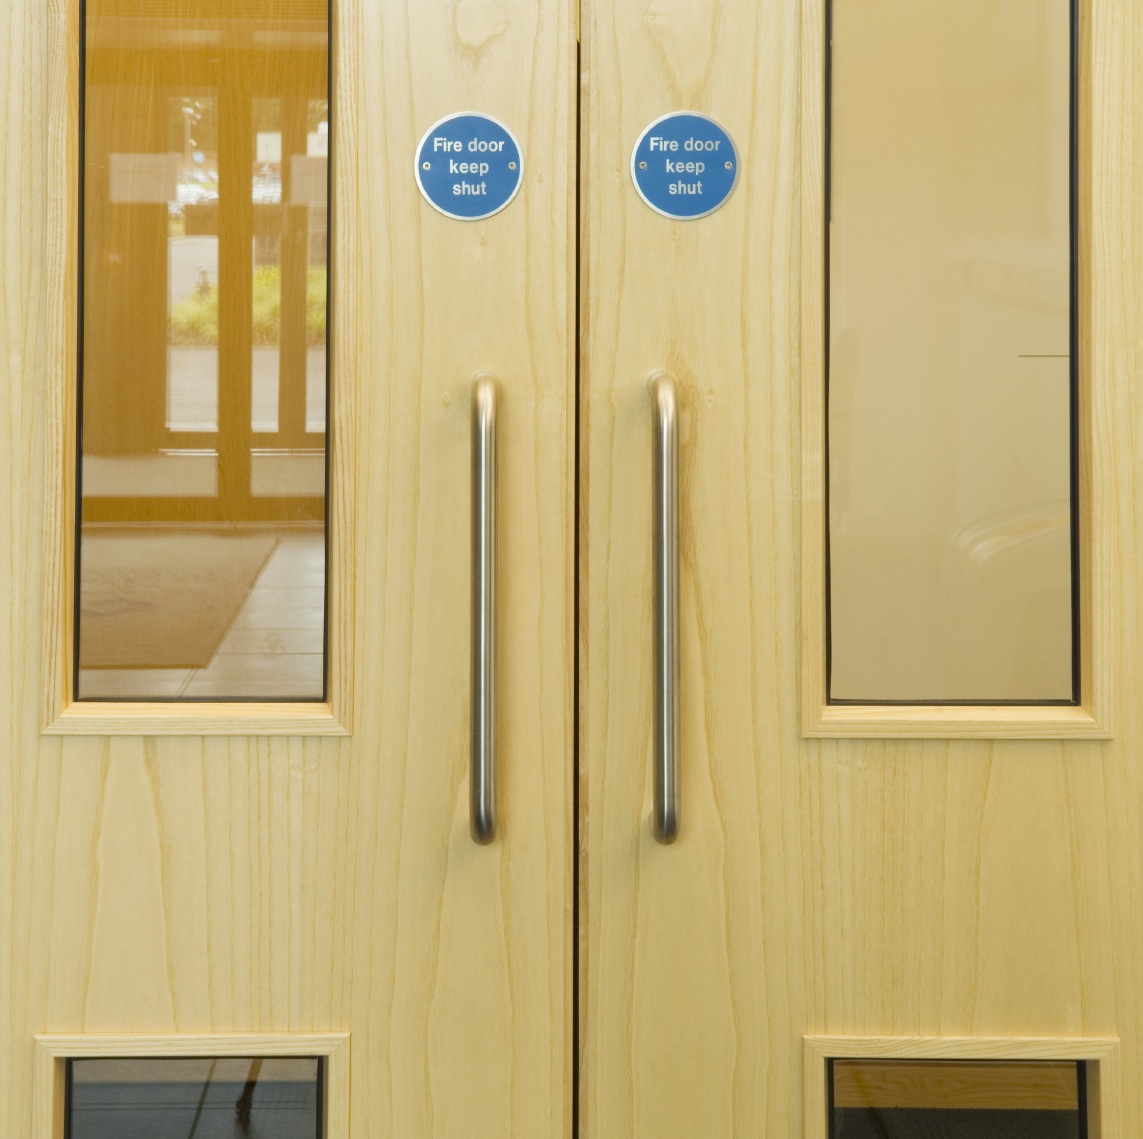 Installation and Restoration of Fire Doors by Gunfire